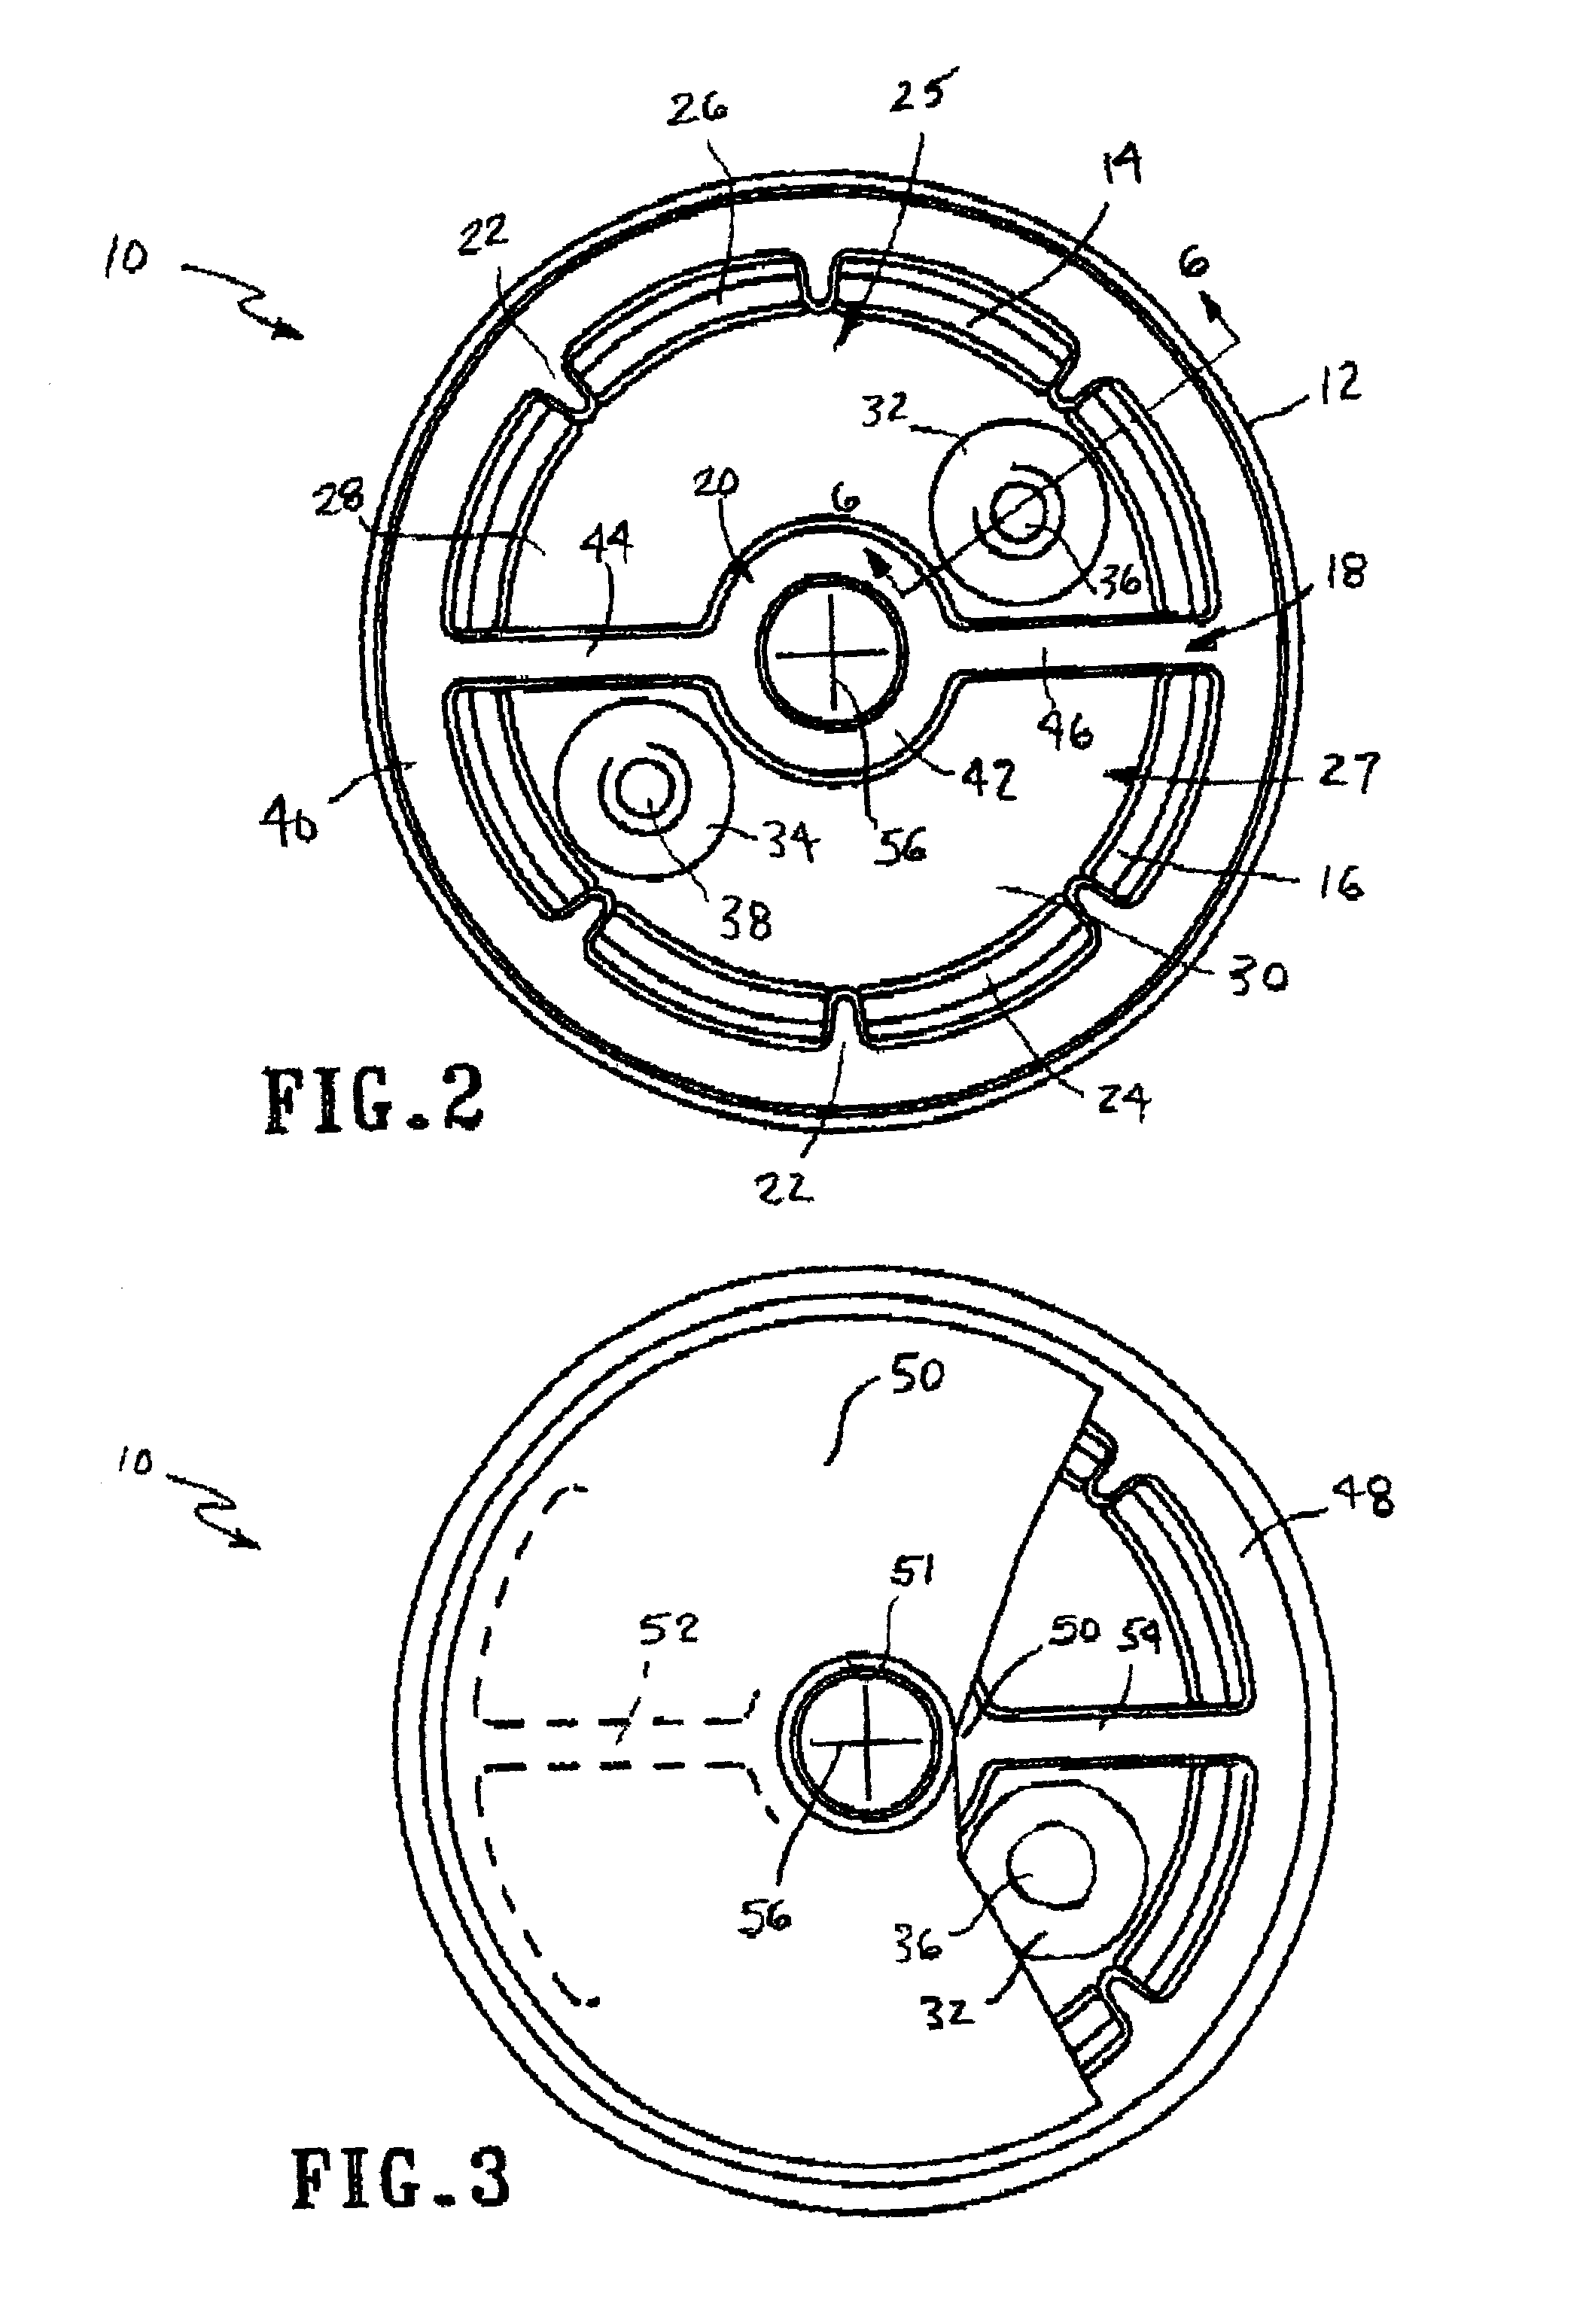 Dispensing lid closure for beverage container and method of making and using the closure